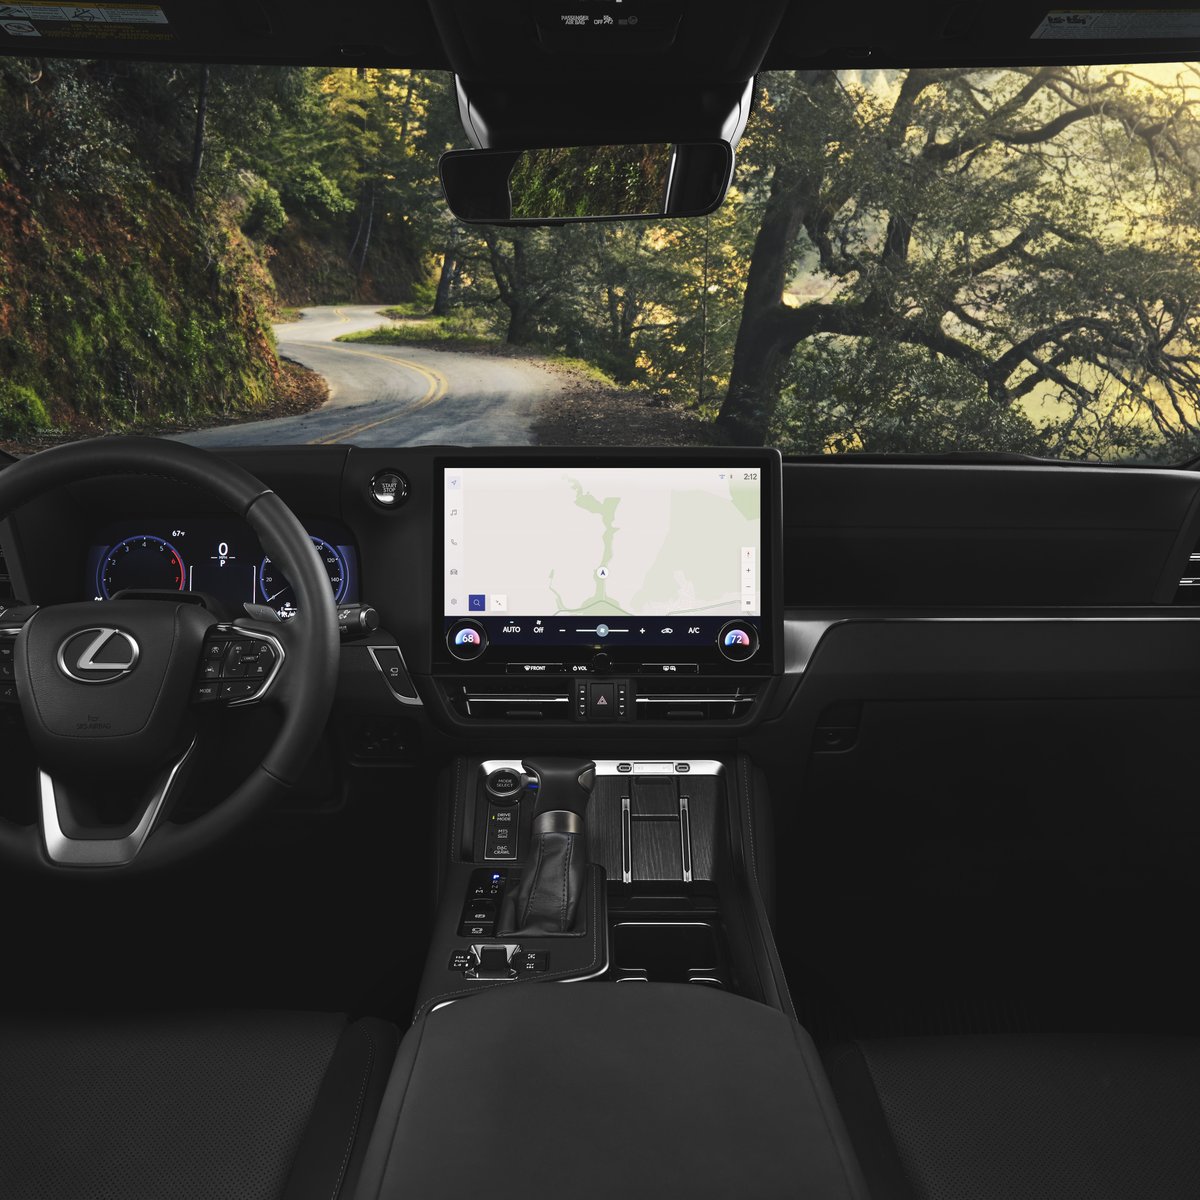 Immerse yourself in a driver-inspired cockpit, meticulously crafted to deepen your connection with every drive. 
🔗 bit.ly/3ITfqSE
.
.
.
#raycatenalexusofwhiteplains #lexusofwhiteplains #lexususa #lexus #luxurycars #automotive #carlifestyle #carshopping #carlovers